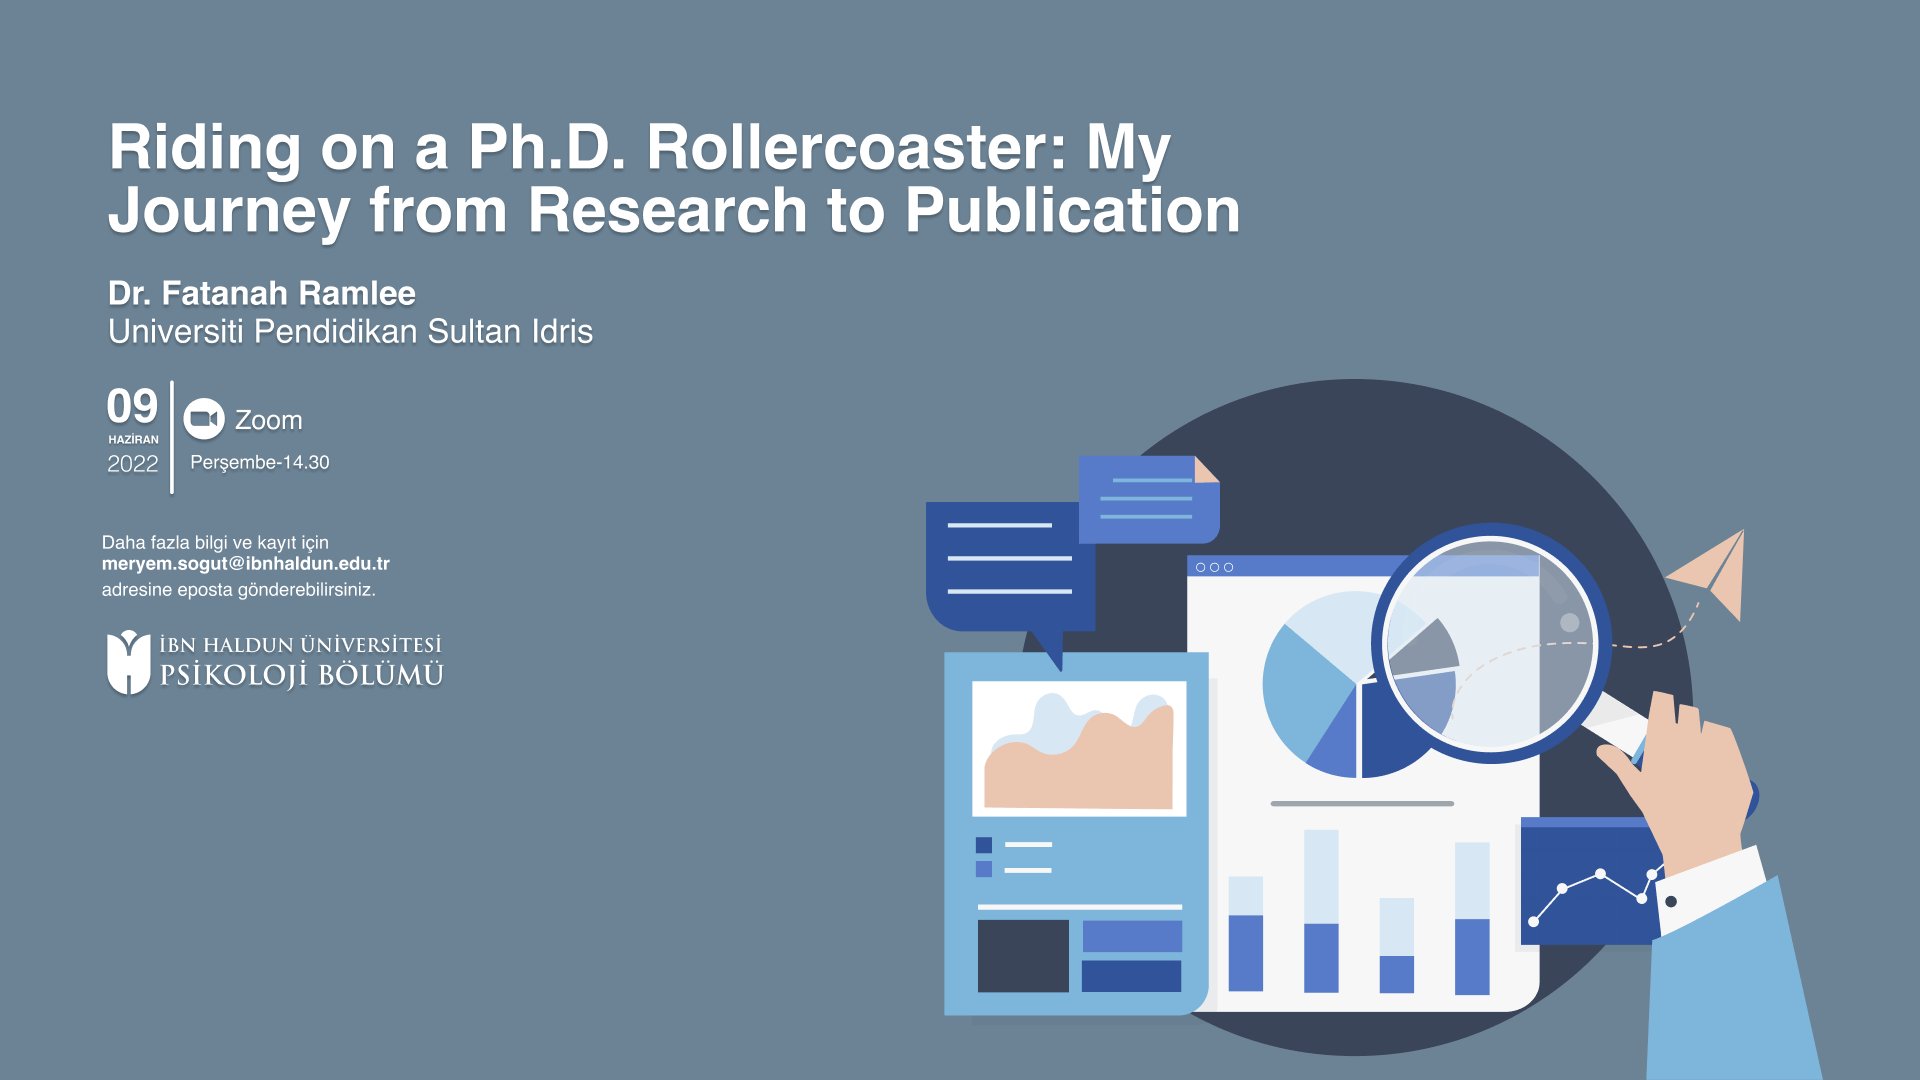 Riding on a Ph.D. Rollercoaster: My Journey from Research to Publication